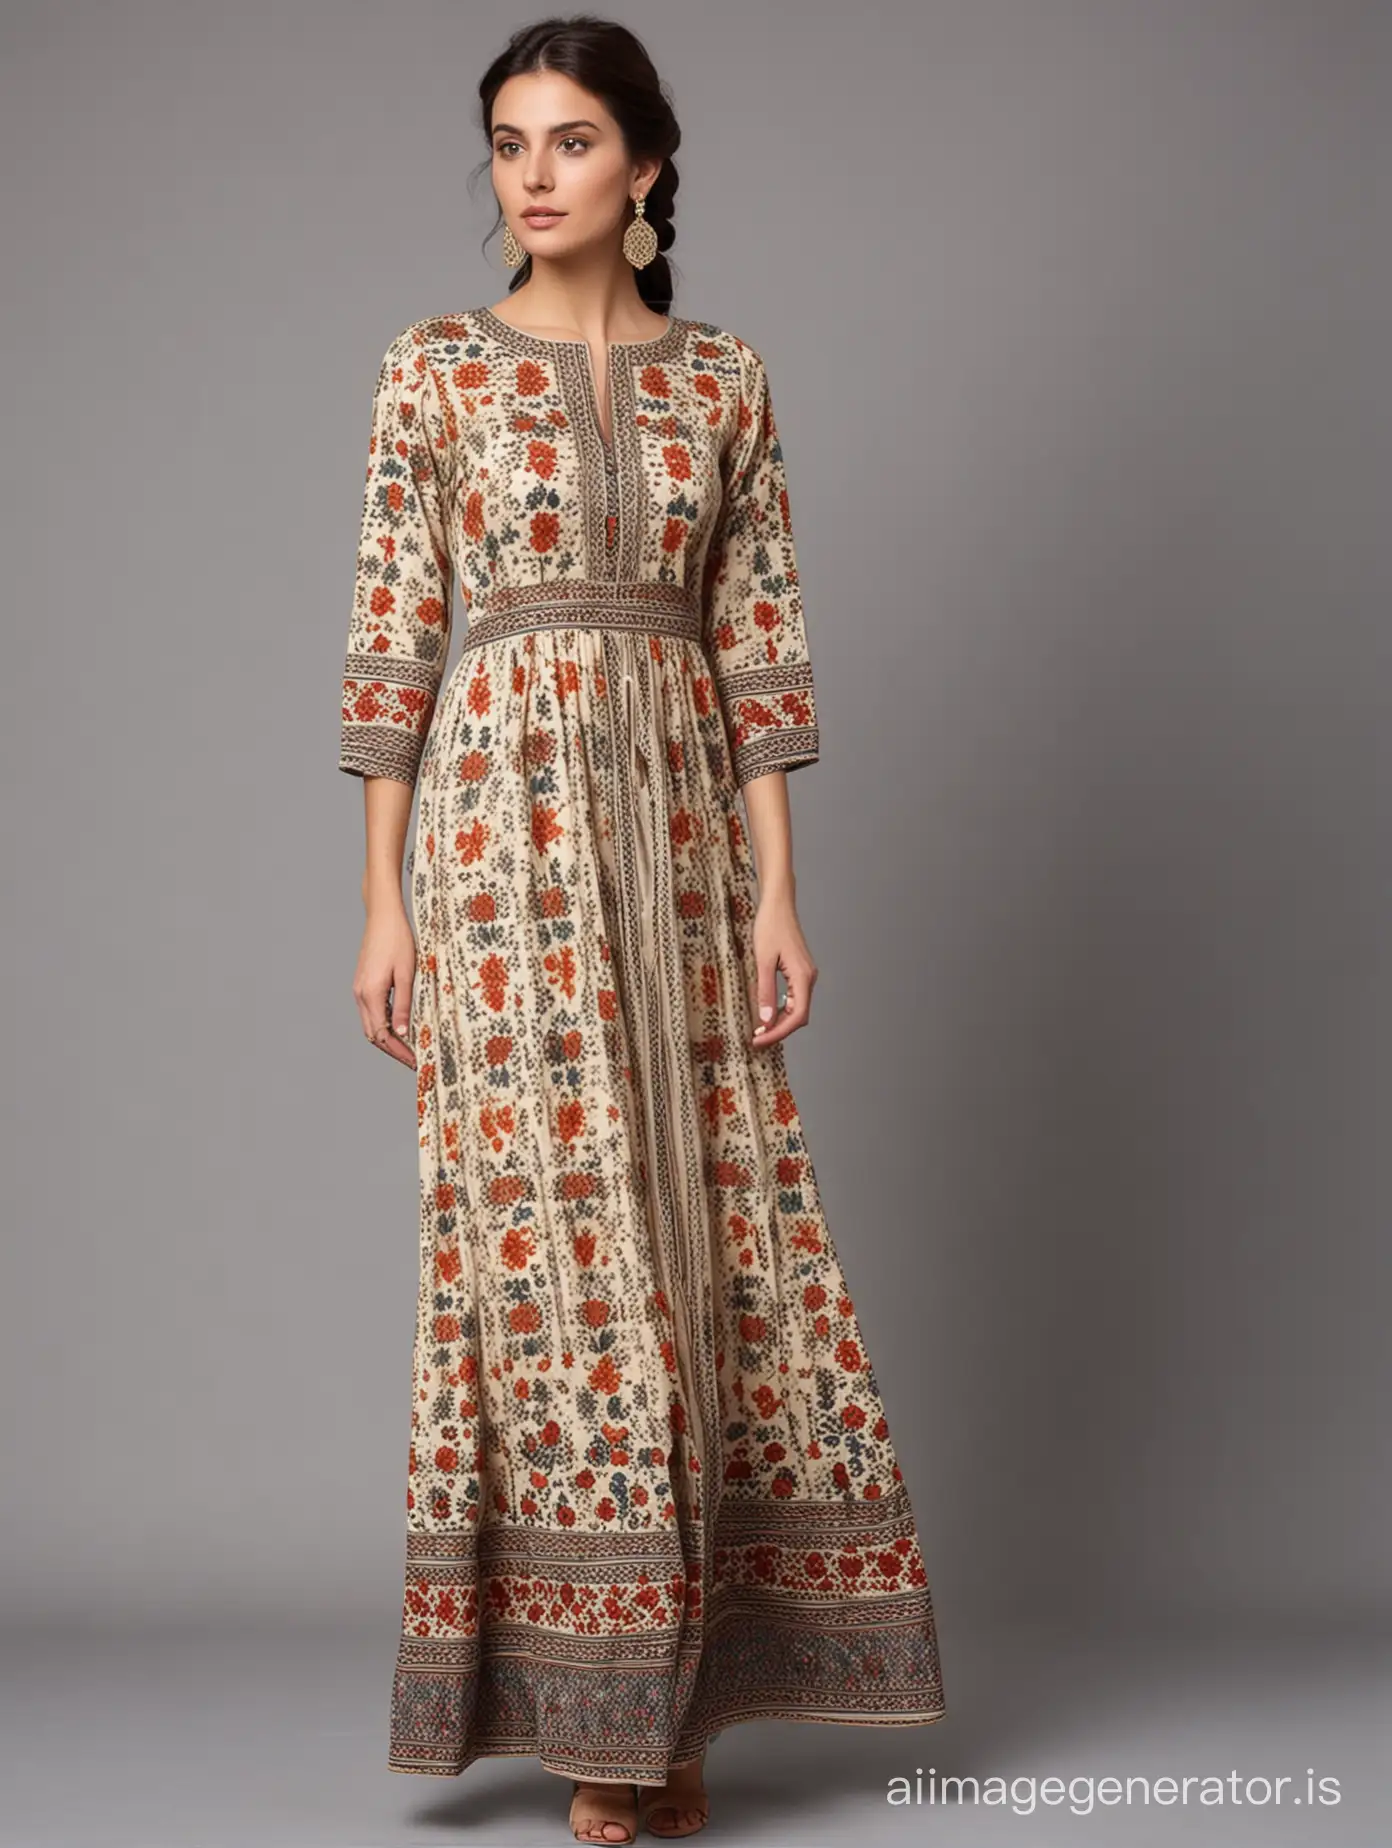 long dress with simple Persian motifs and patterns